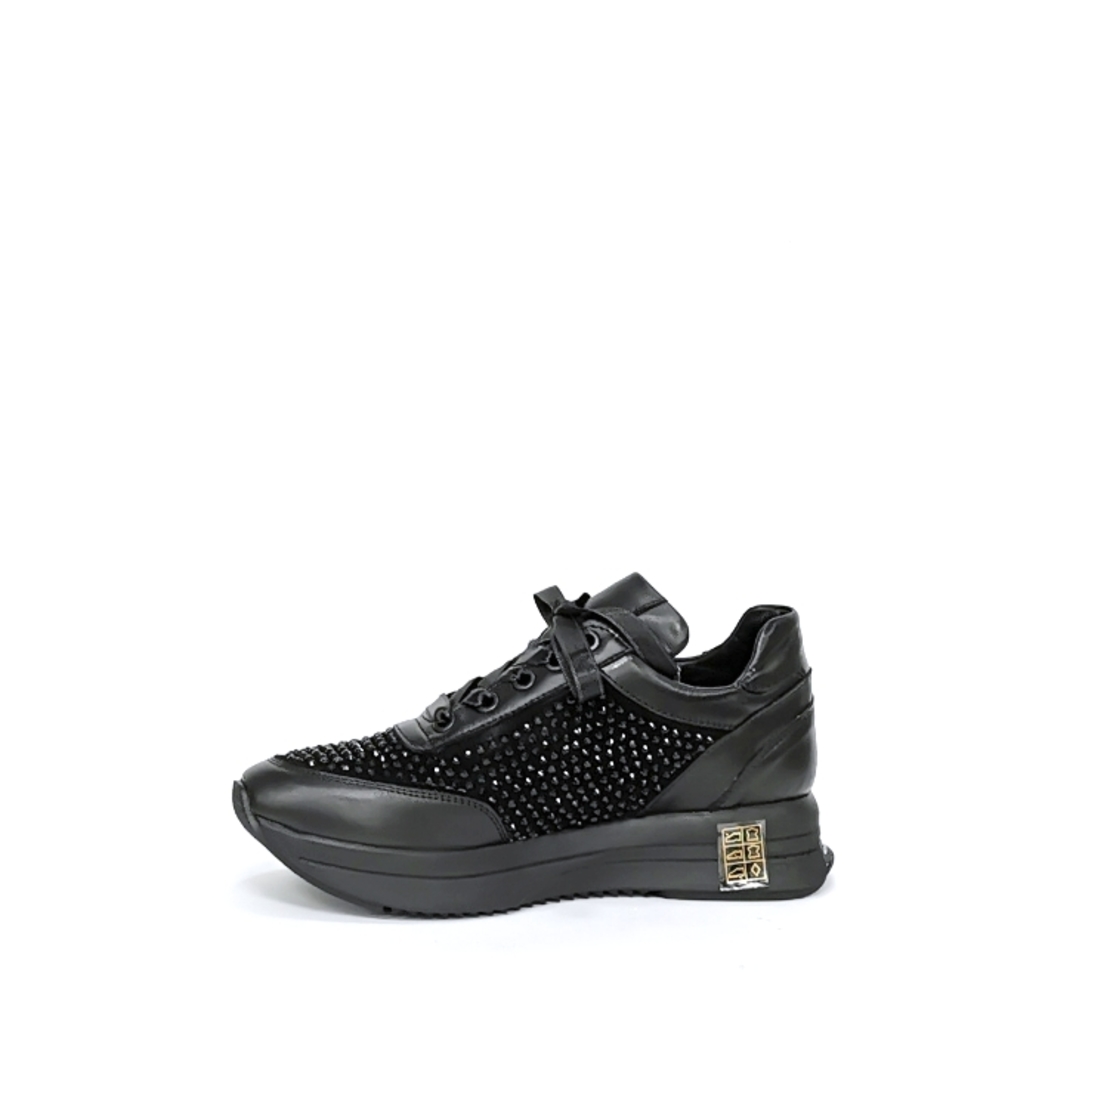 Women's sneakers made of natural leather with an anatomical insole in black/71614